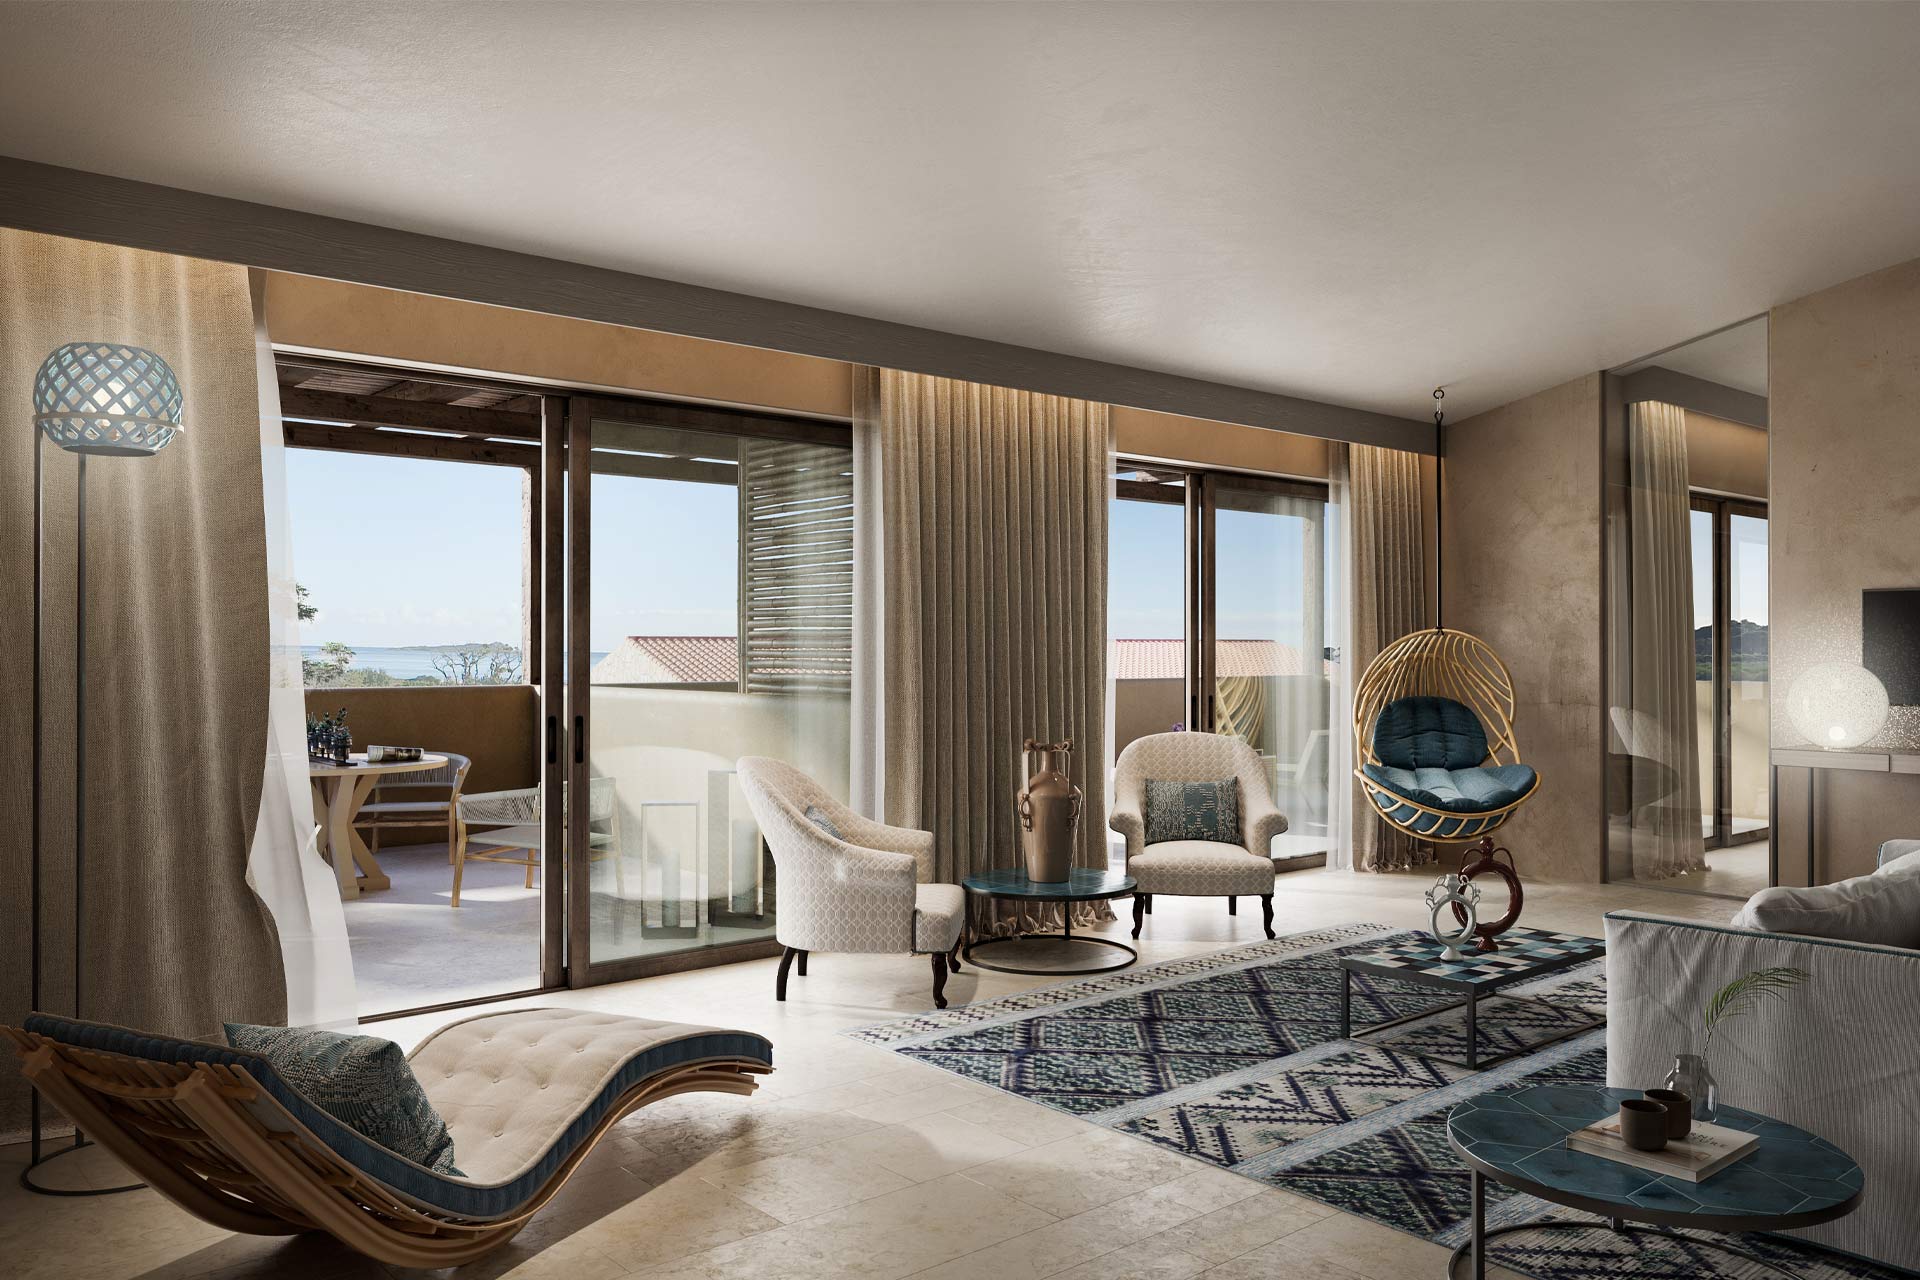 A rendering of a guestroom at Baglioni Resort Sardinia in Italy